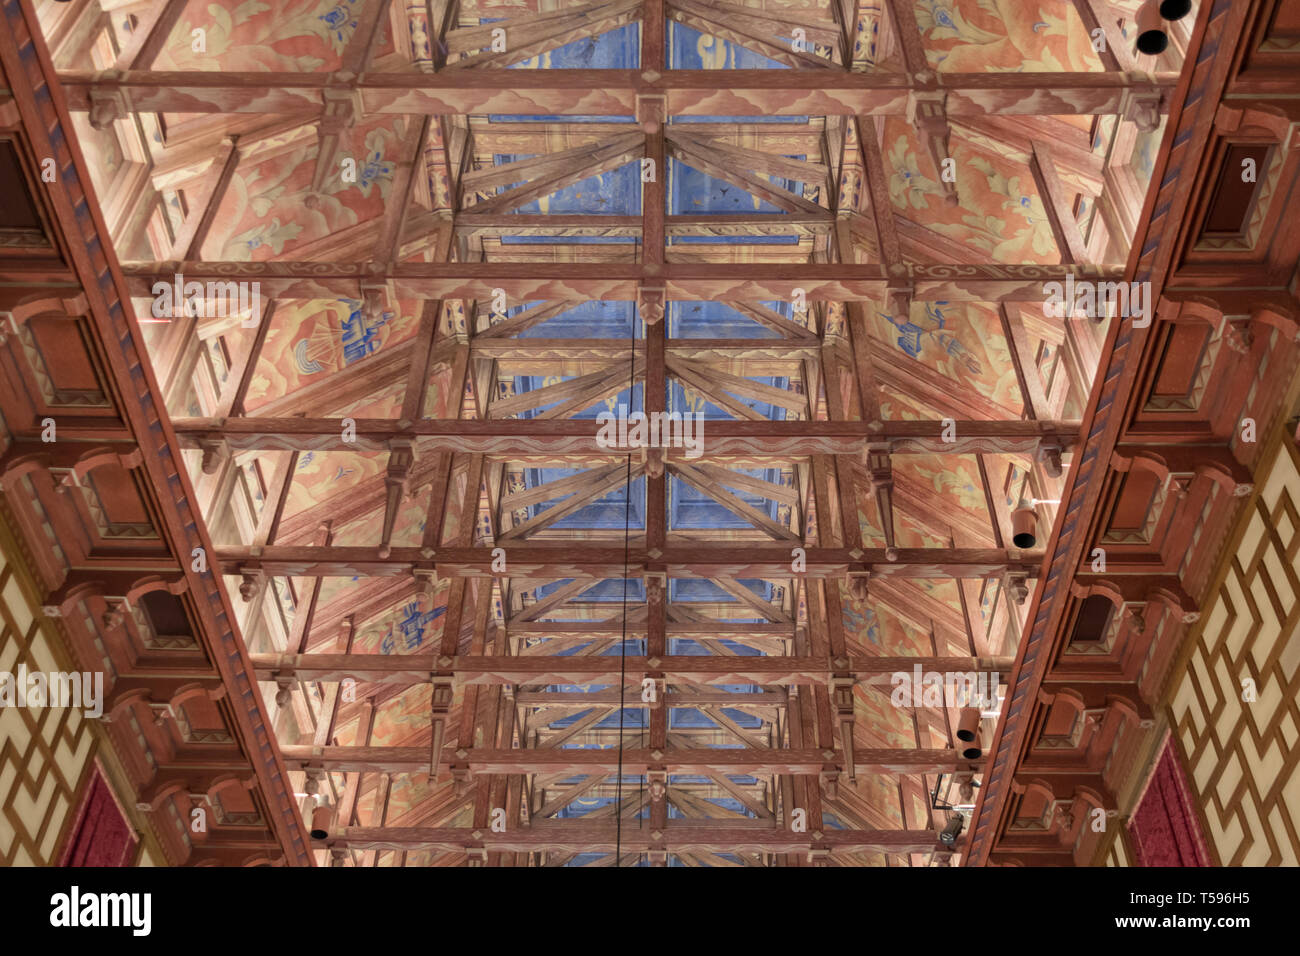 The elaborately painted wooden ceiling of the City Council chamber in Stockholm City Hall.The ceiling was built in the style of a Viking longhouse. Stock Photo